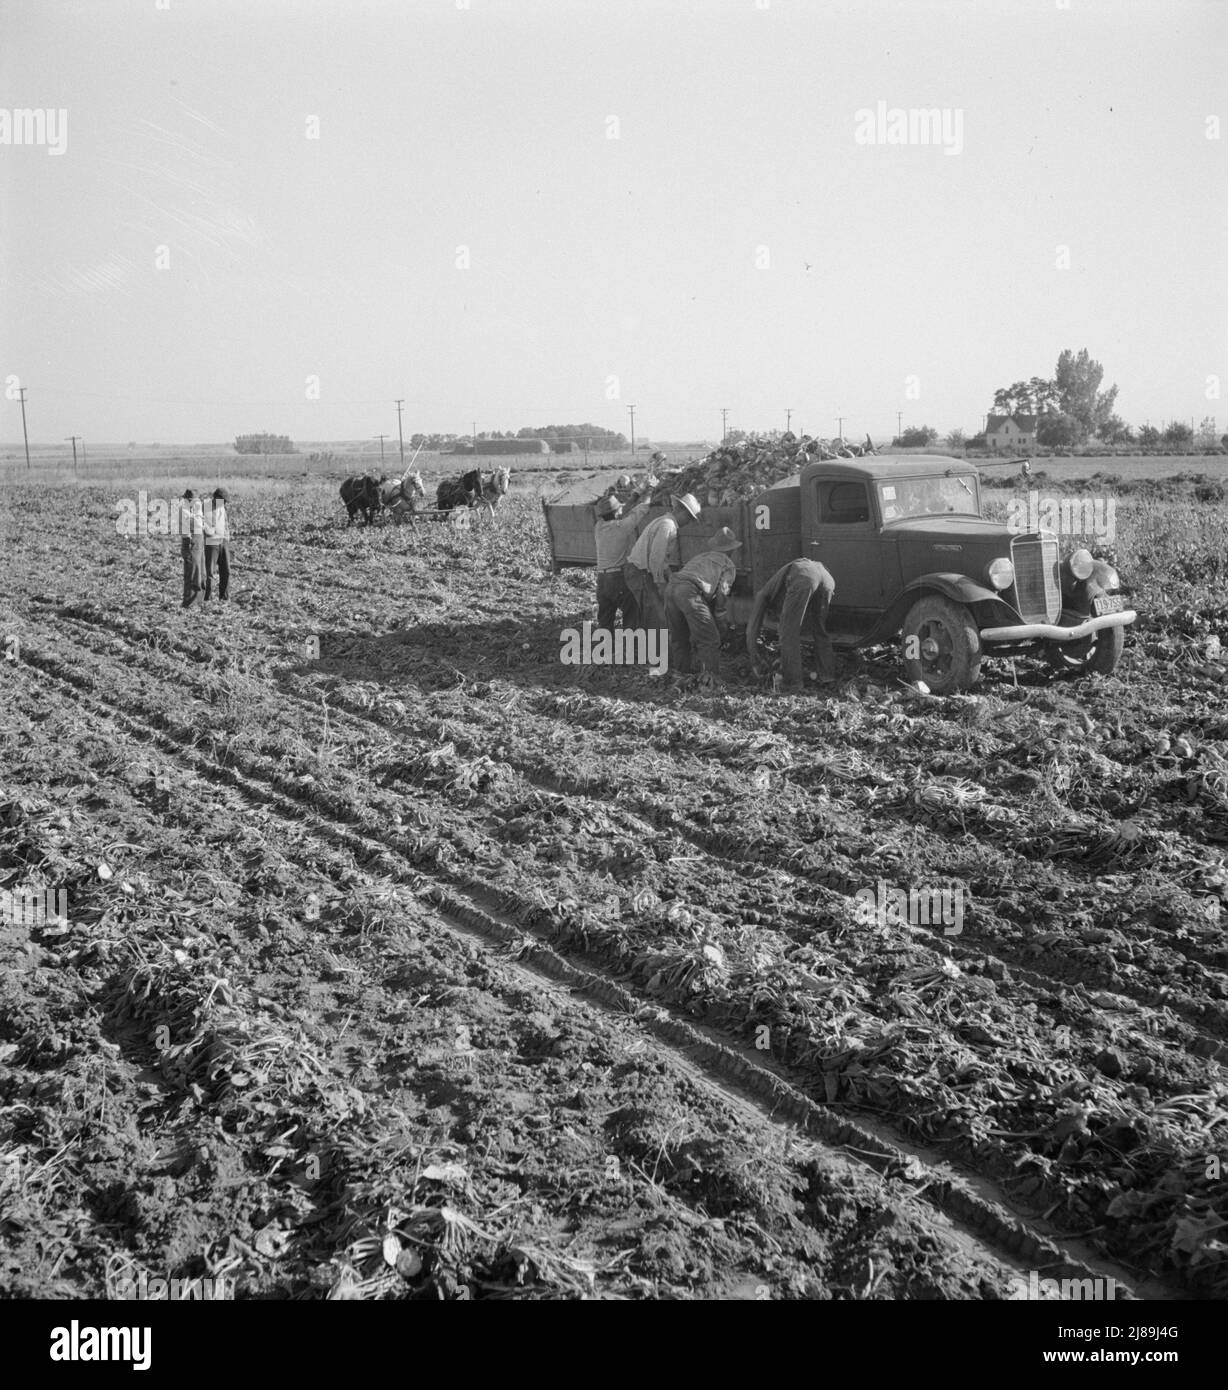 View of sugar beet field with crew loading truck for Nyssa factory. Average yield of beets in excess of sixteen tons per acre in this region. Near Ontario, Malheur County, Oregon. Stock Photo